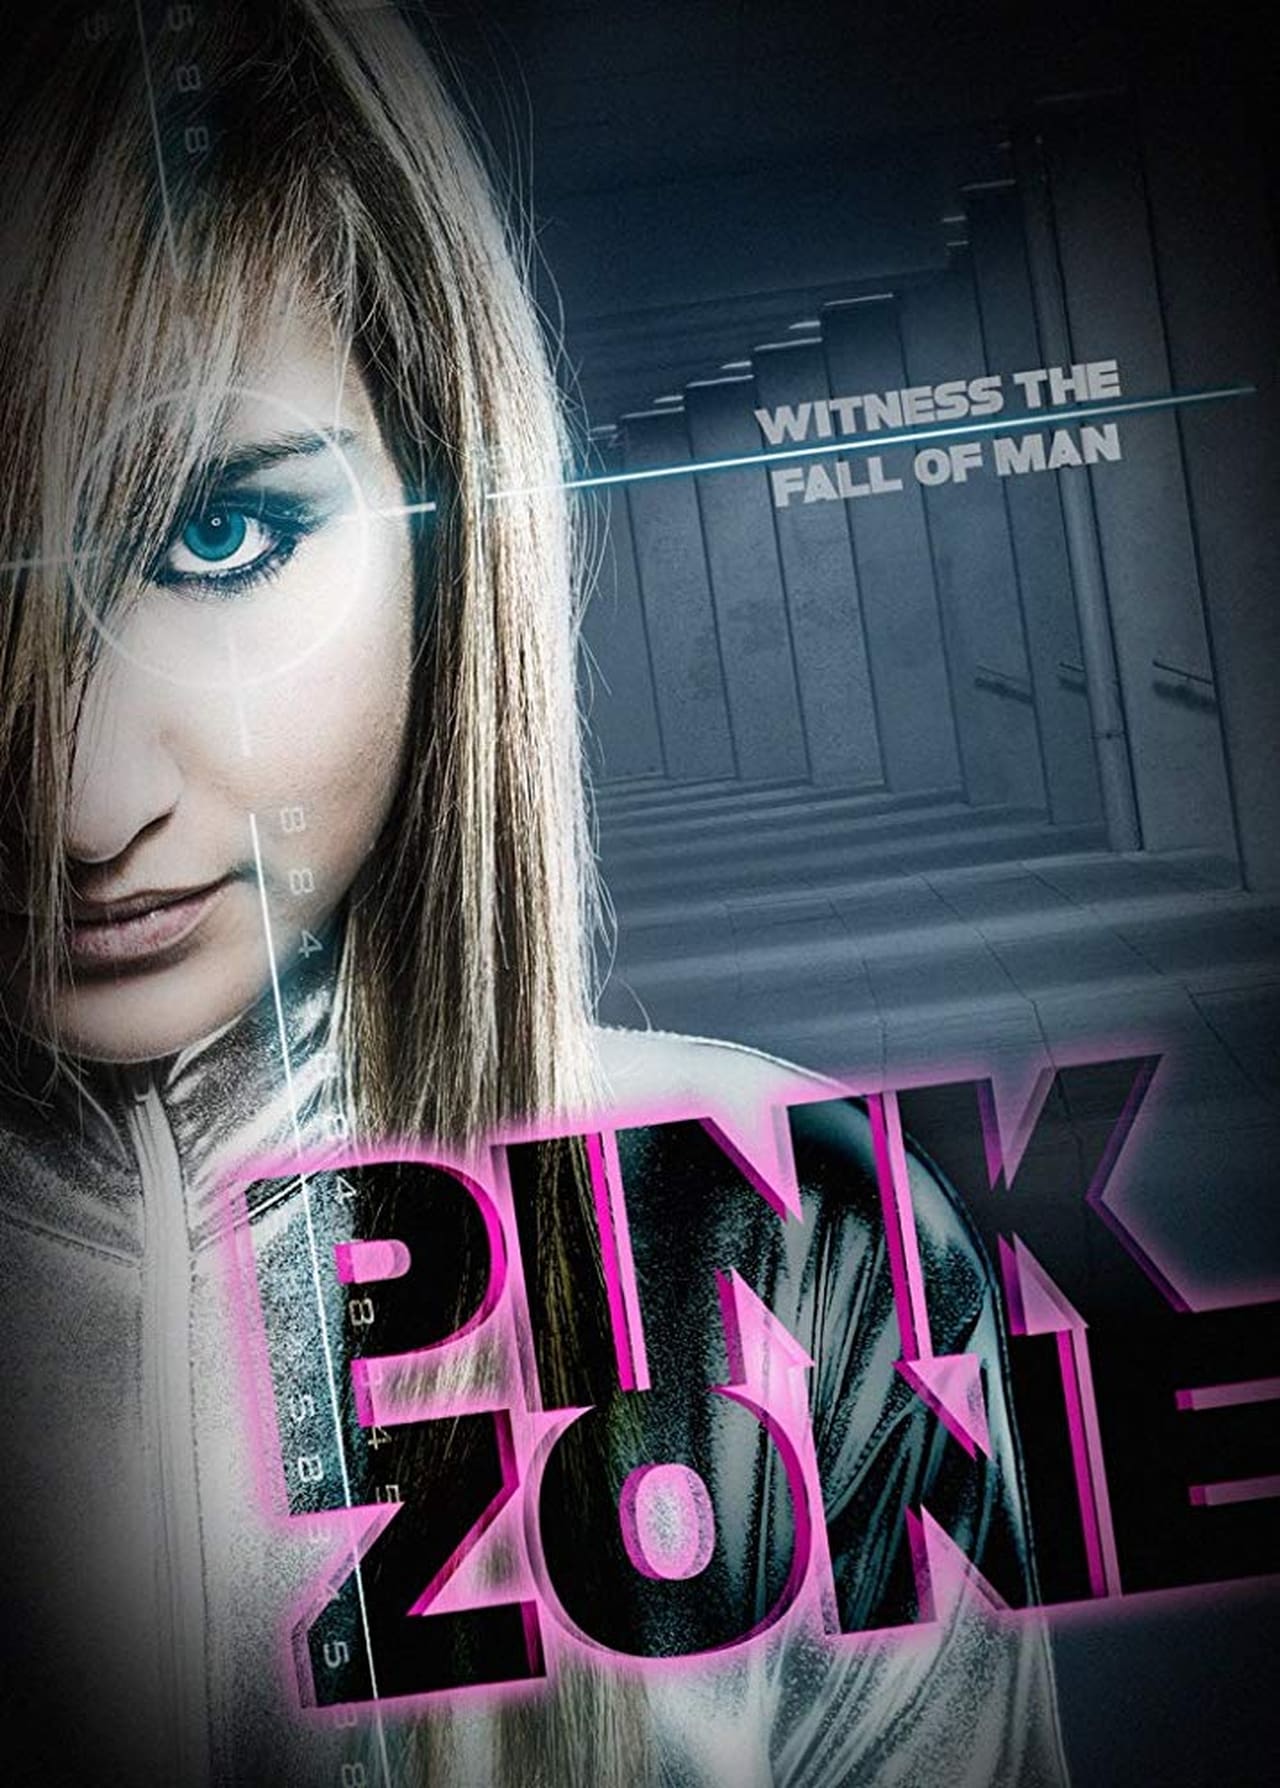 The Pink Zone